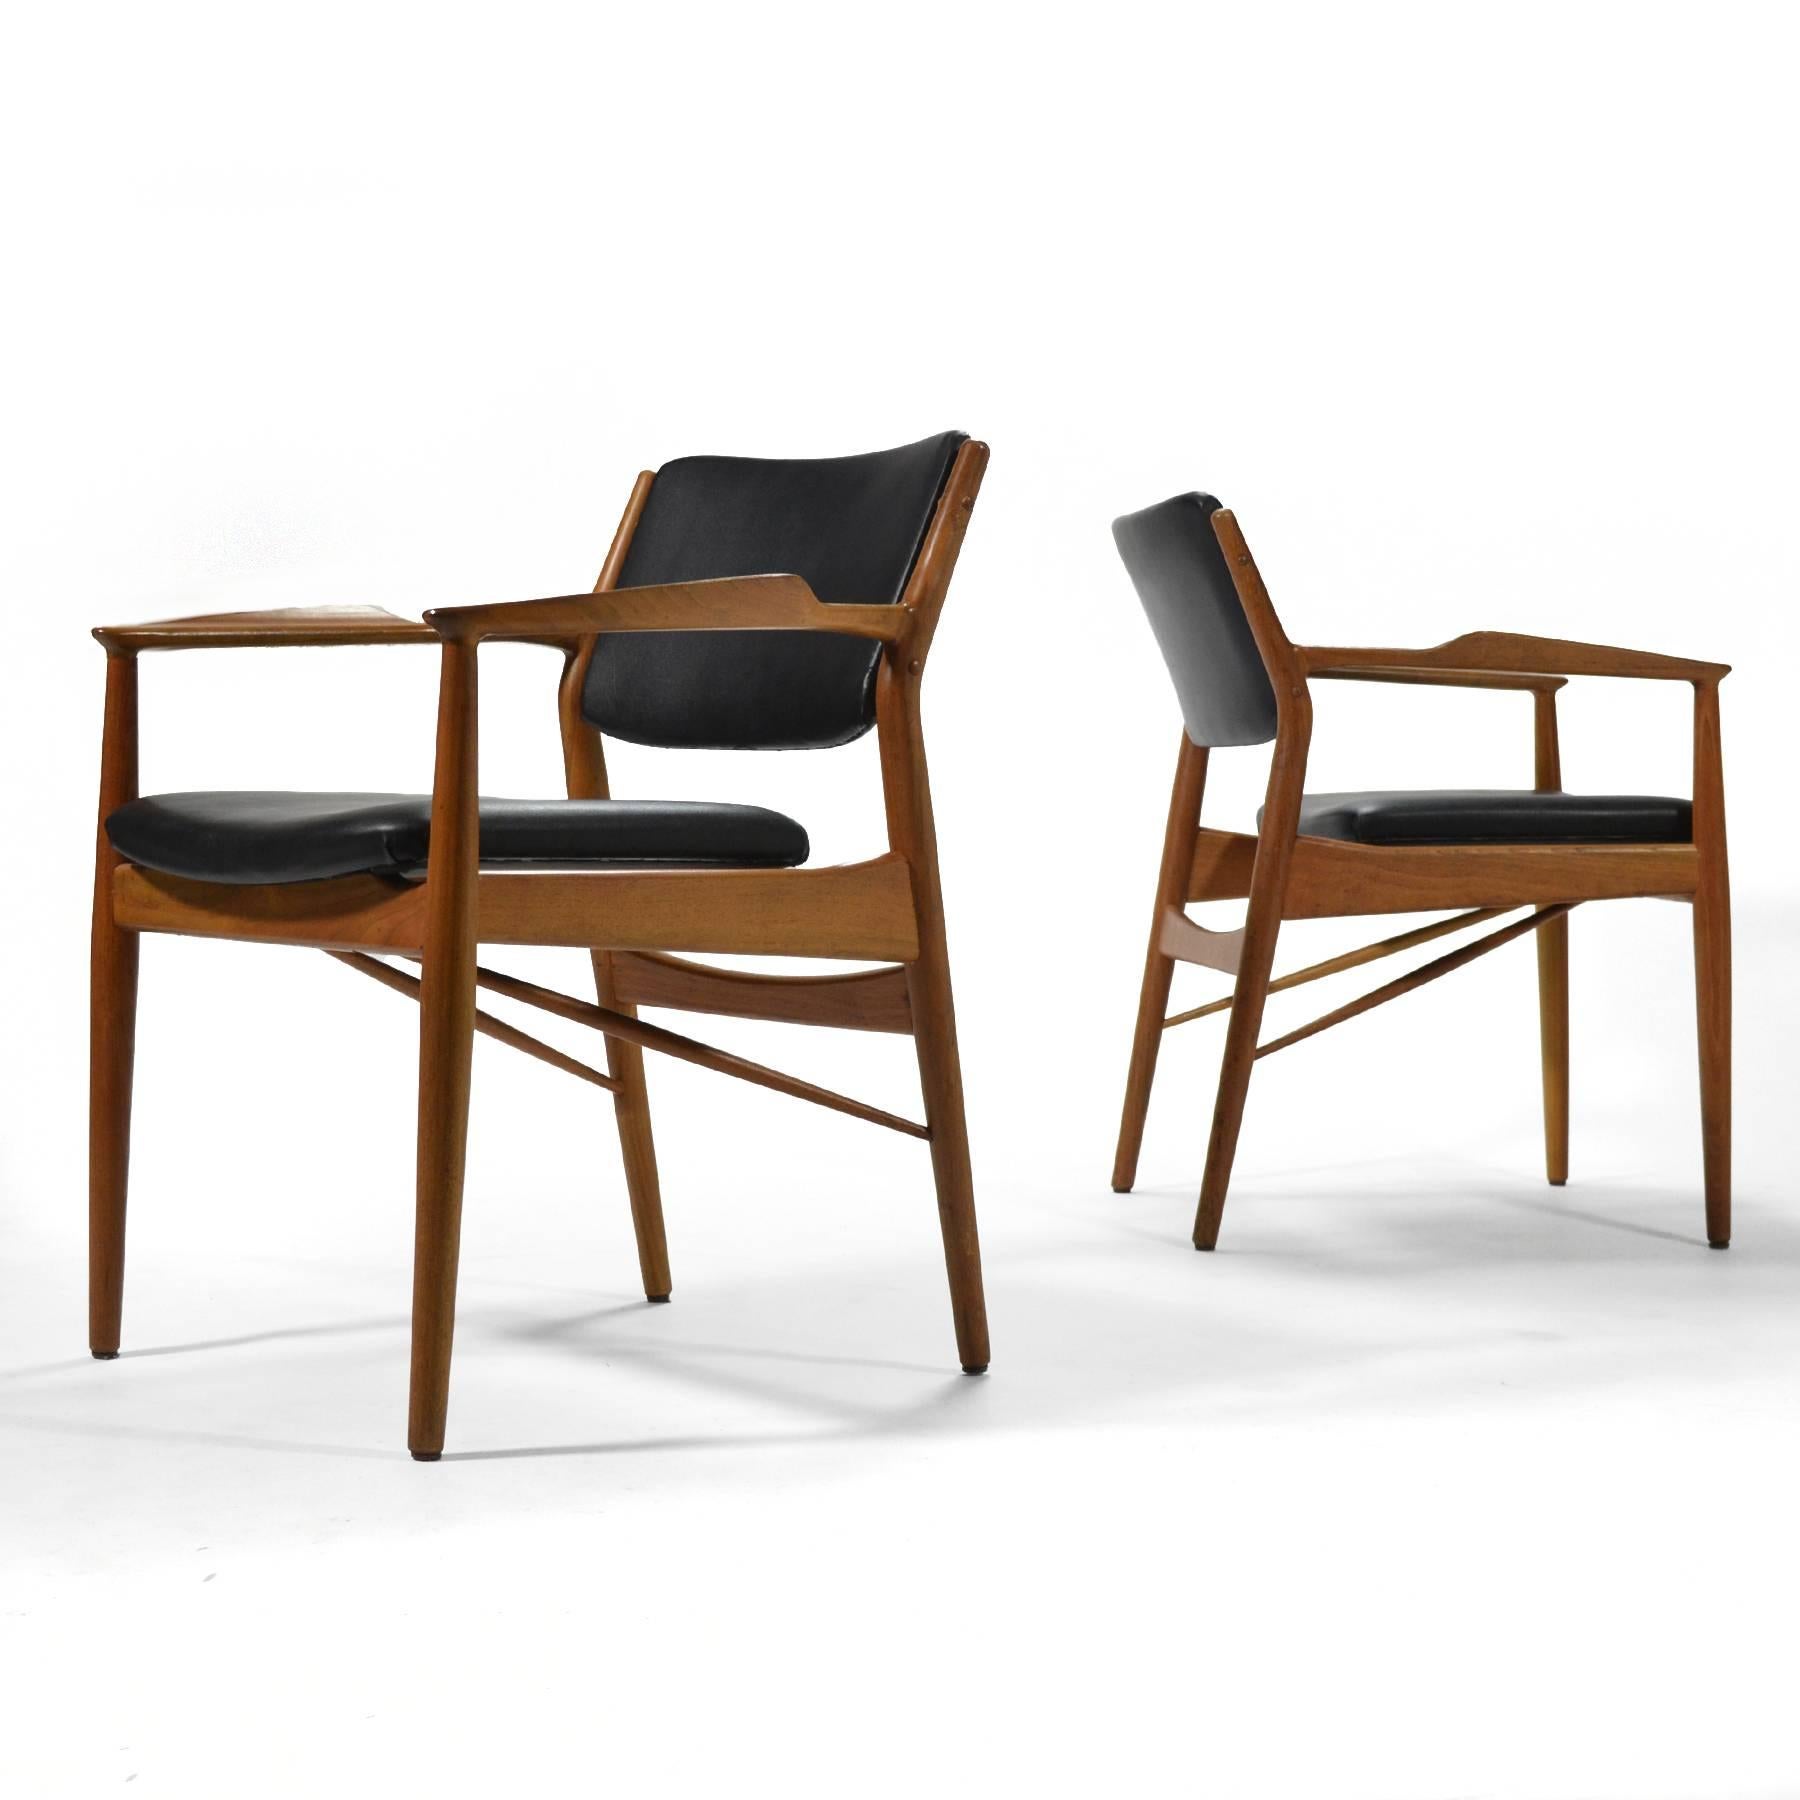 These model 51A Arne Vodder armchairs typify Danish modern as popularized by Finn Juhl. Beautifully crafted by P. Olsen Sibast Møbler, the sculptural teak frames support upholstered seat and backs accentuating their floating quality. 

We have two